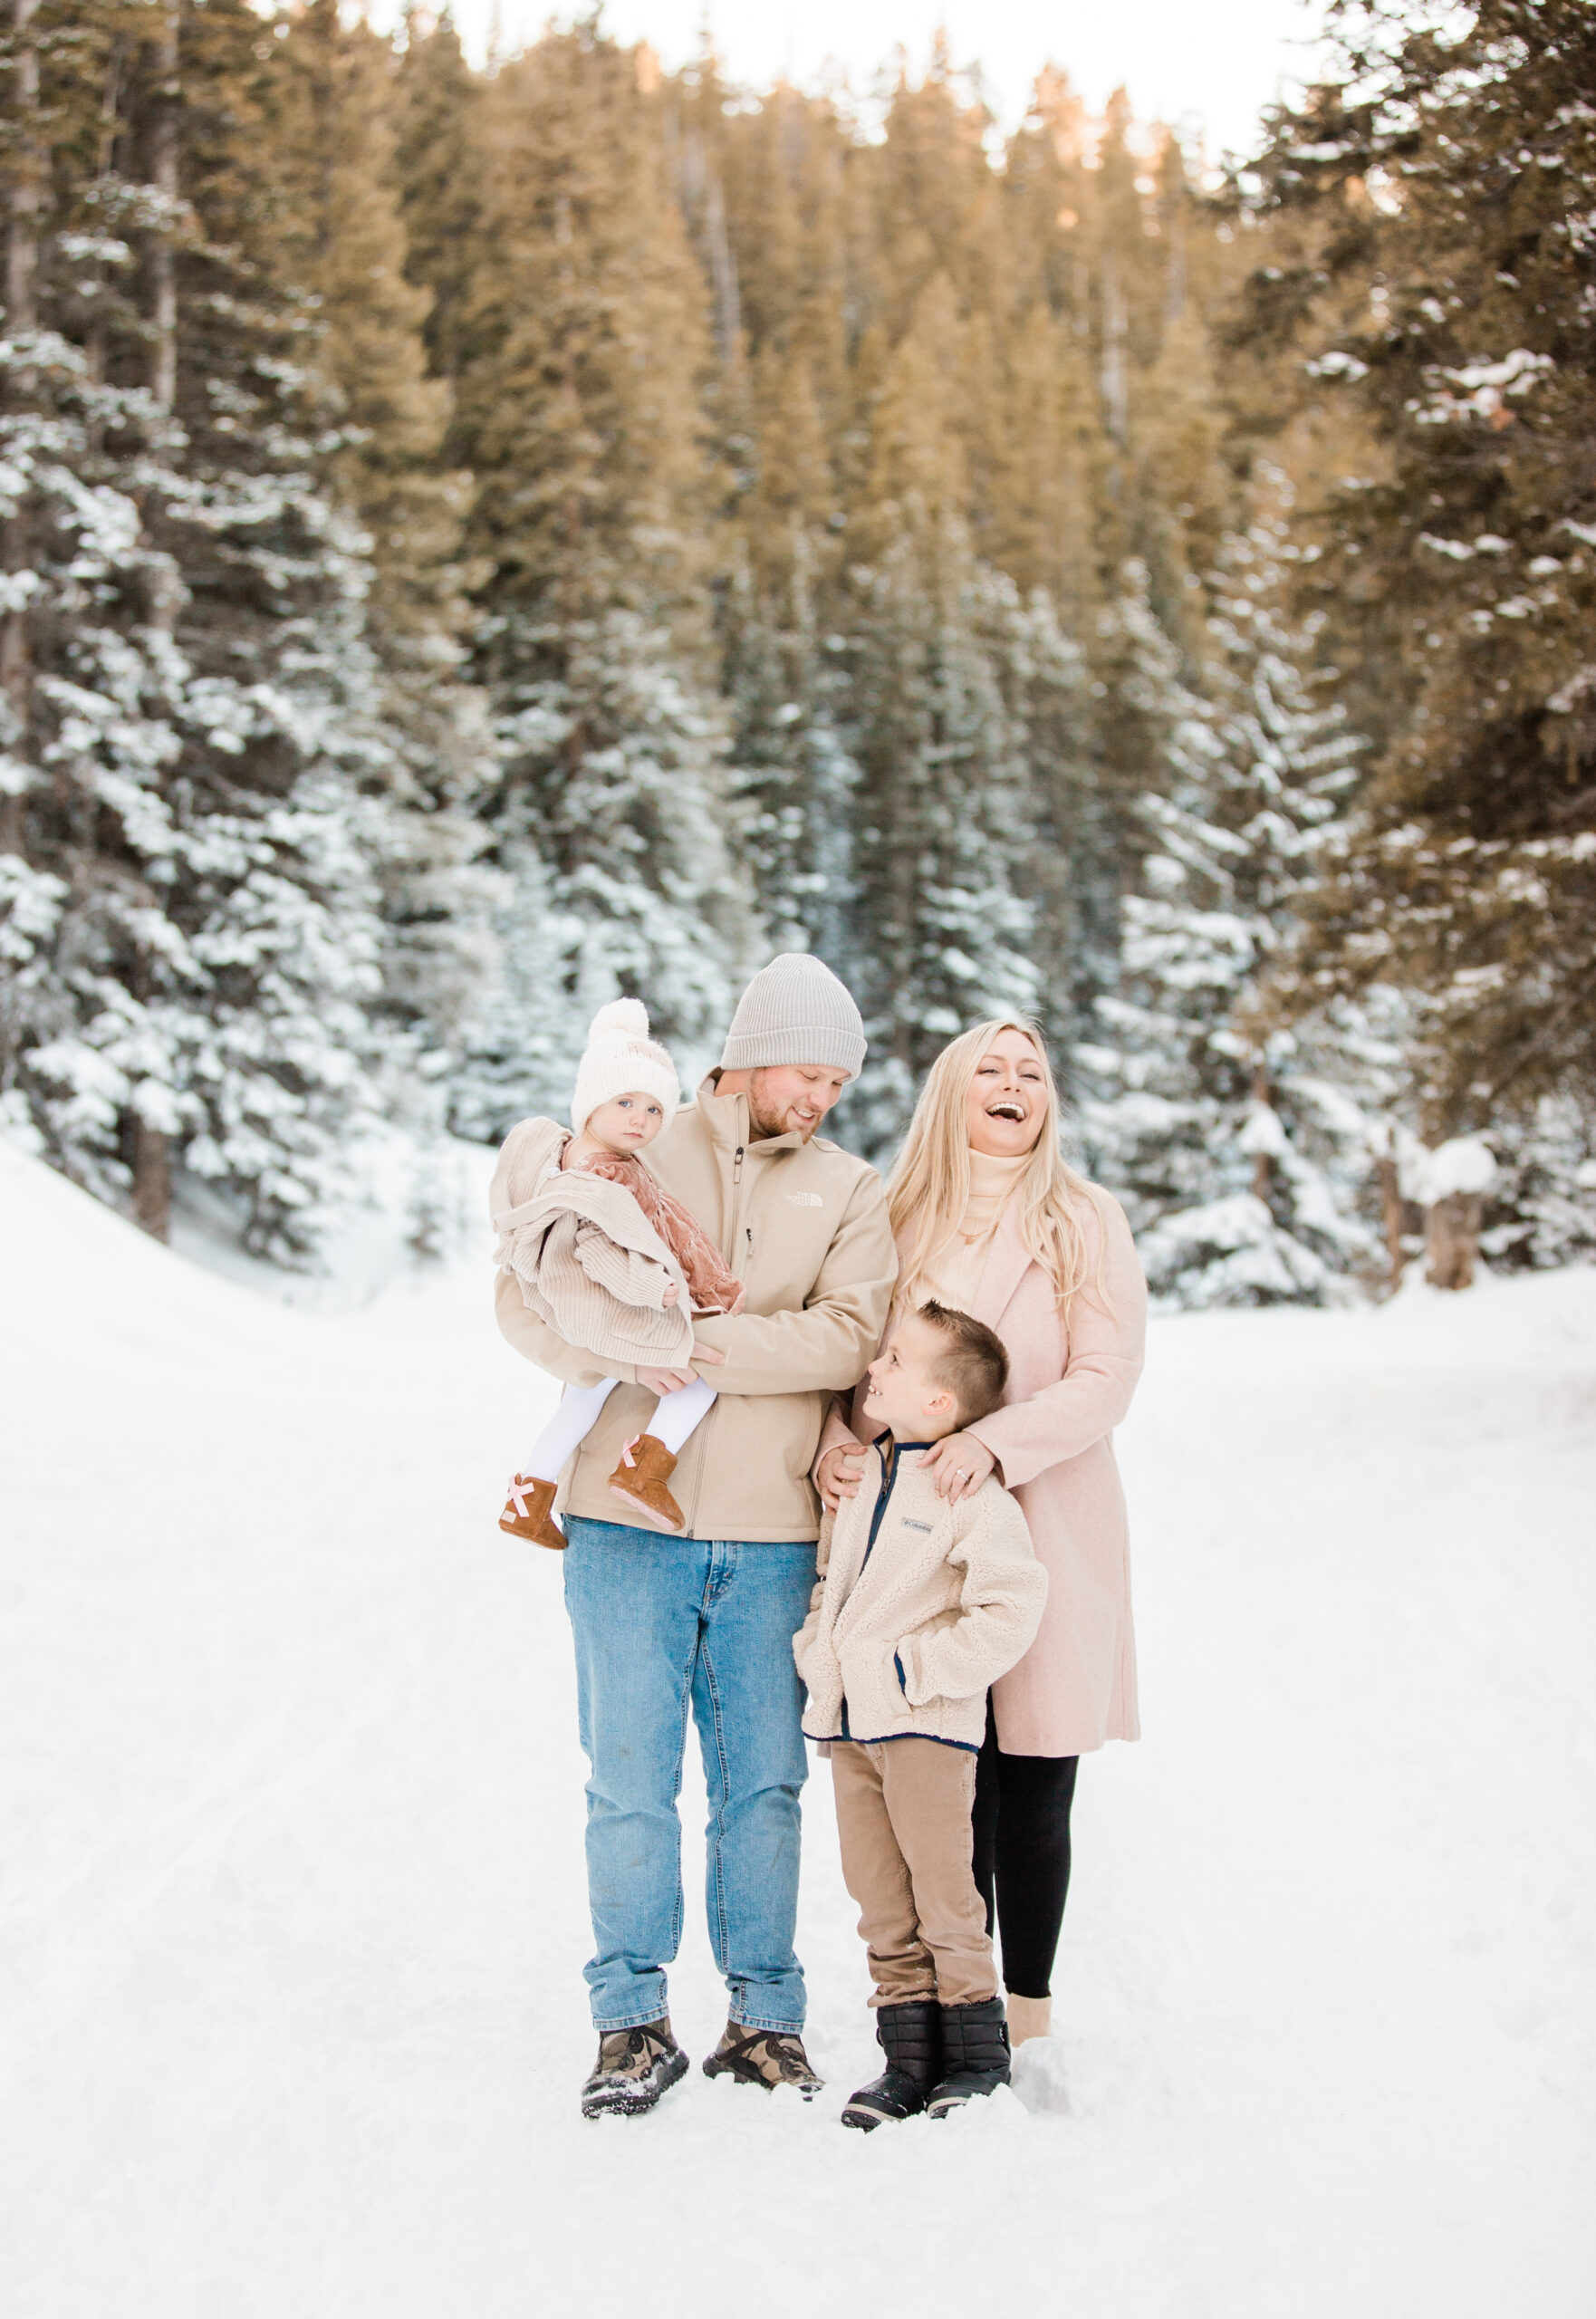 Family of 4 with 2 young kids in the snow